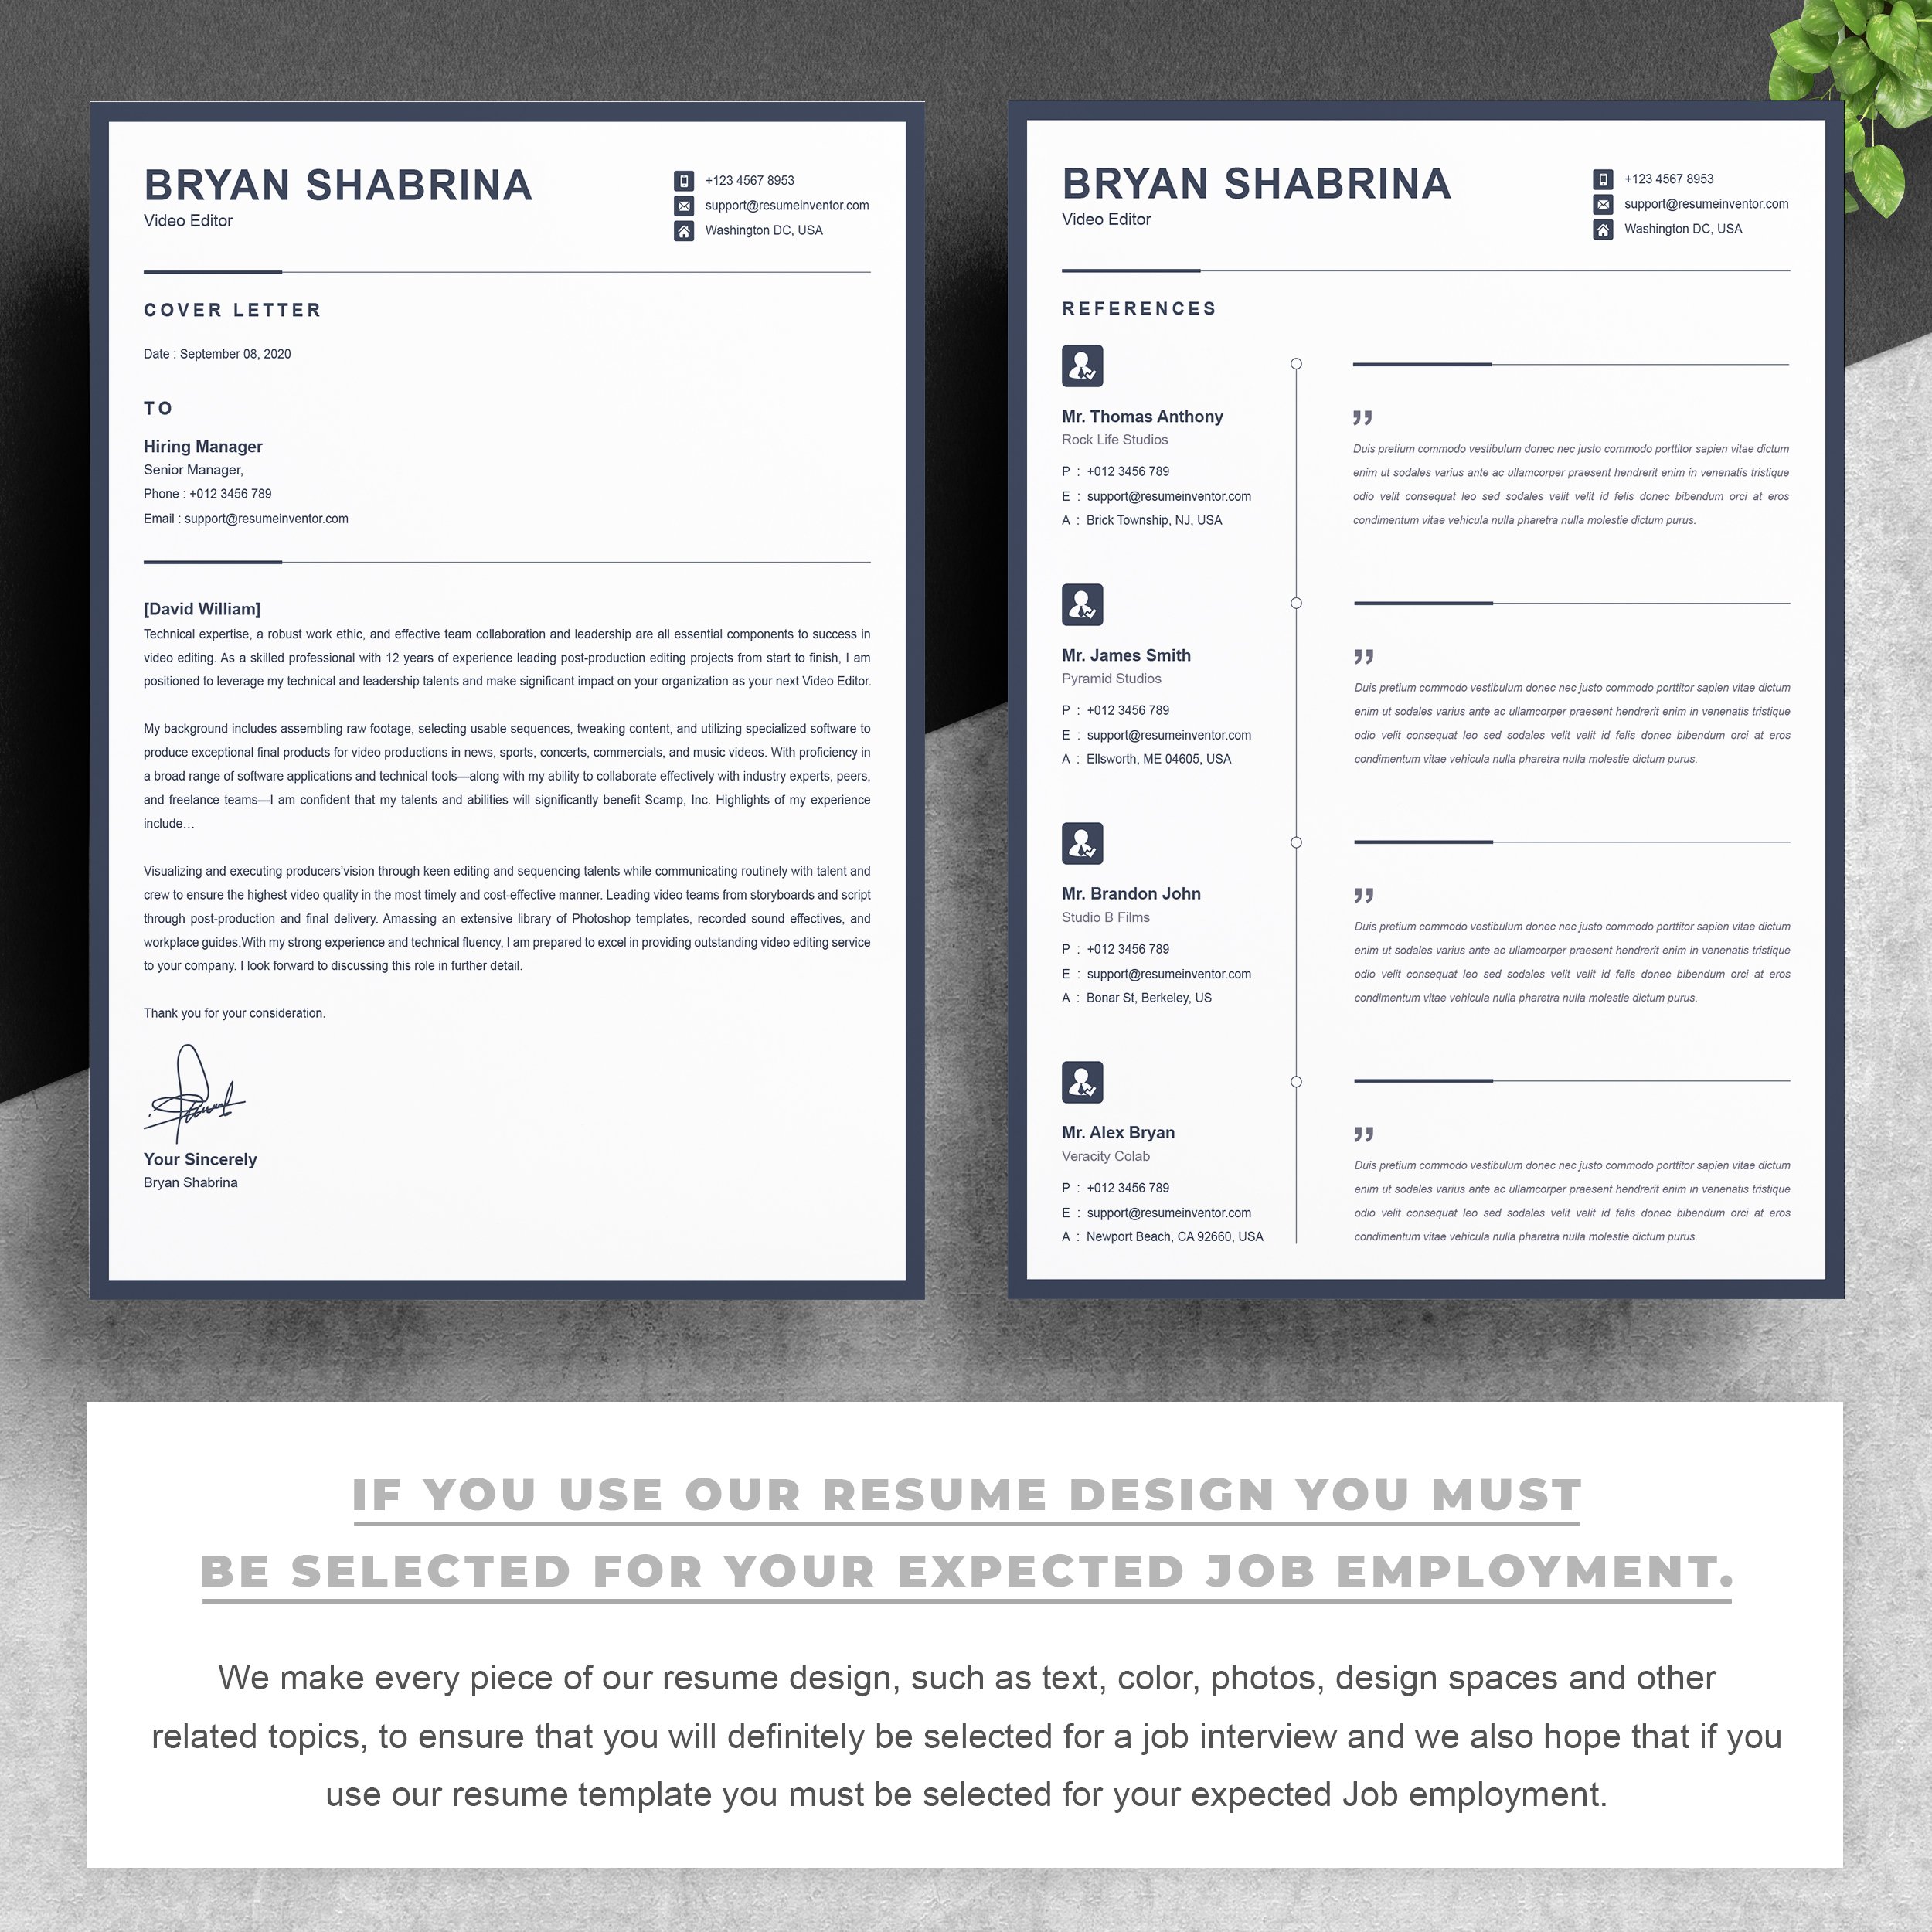 03 2 pages free resume design template copy 414